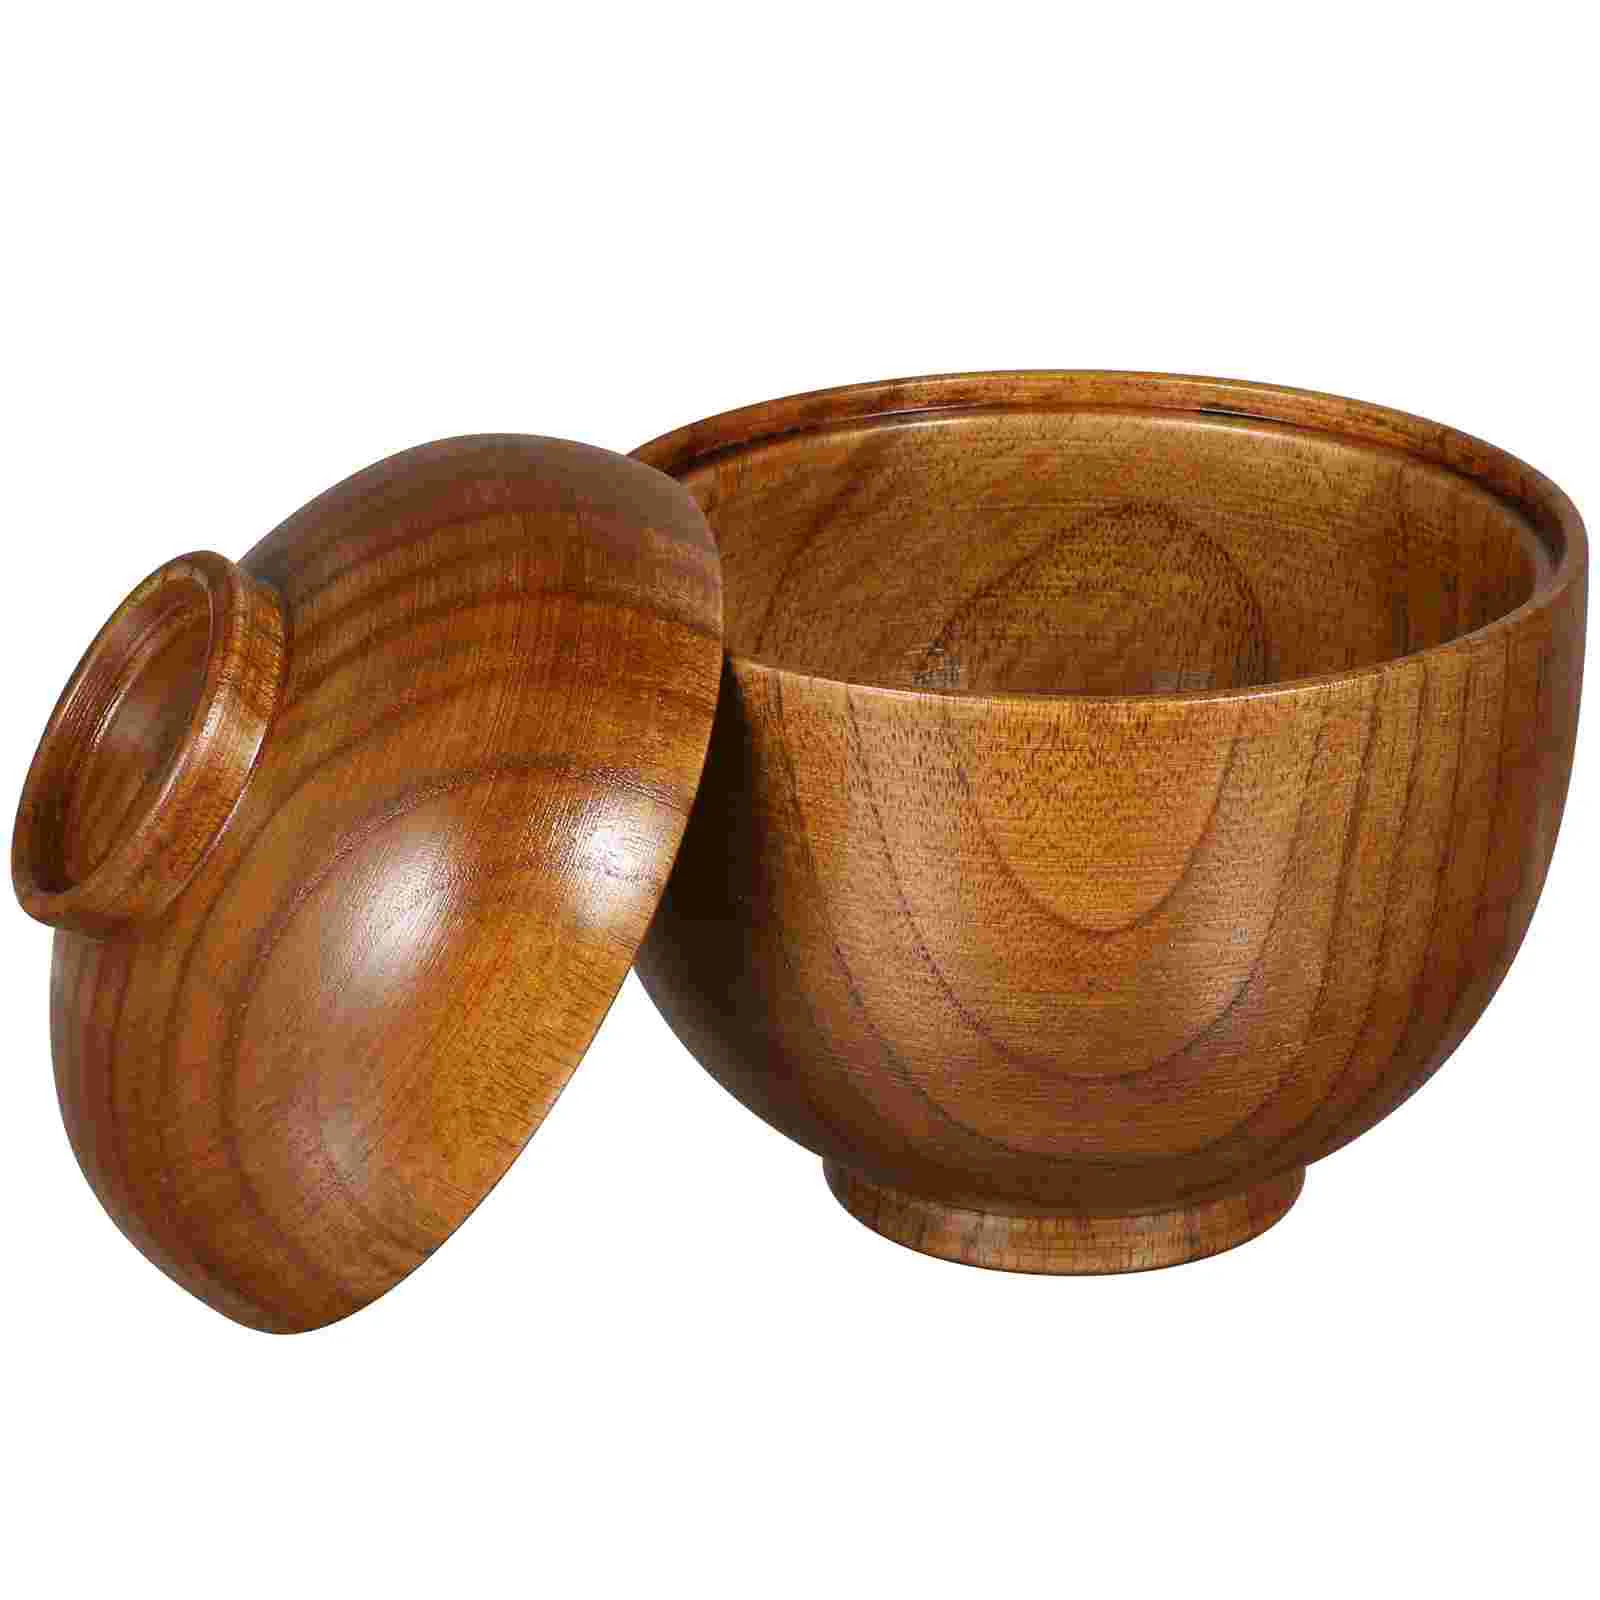 

Small Wooden Bowl Rice Soup Bowl Noodle Ramen Fruit Salad Mixing Bowl Food Serving Bowl With Lids Kitchen Tableware